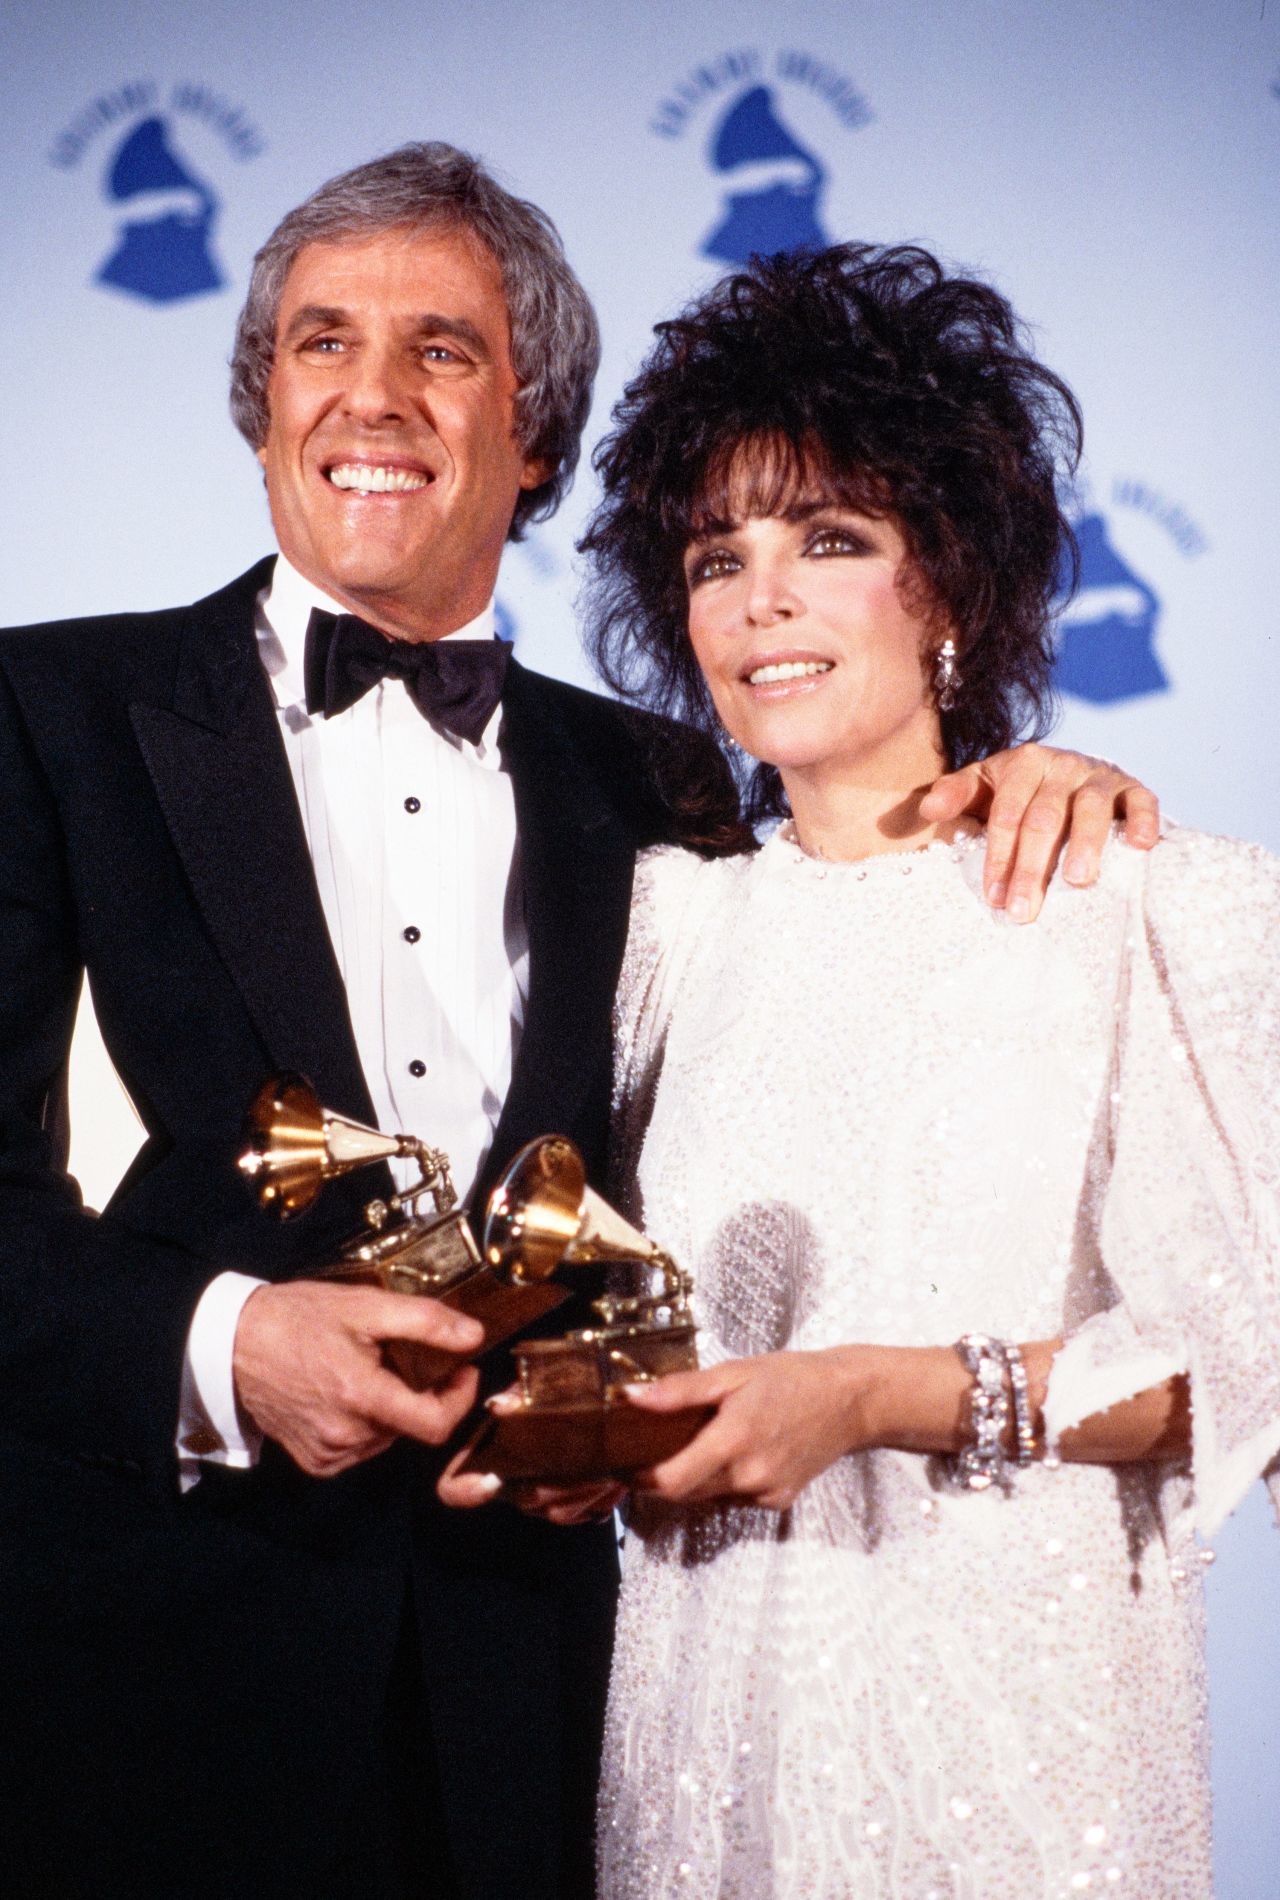 Bacharach and his third wife, lyricist Carole Bayer Sager, hold Grammys they won for the hit song "That's What Friends Are For" in 1987. The charity collaboration between Warwick, Elton John, Gladys Knight and Wonder topped the charts in 1986 and raised millions for AIDS research.